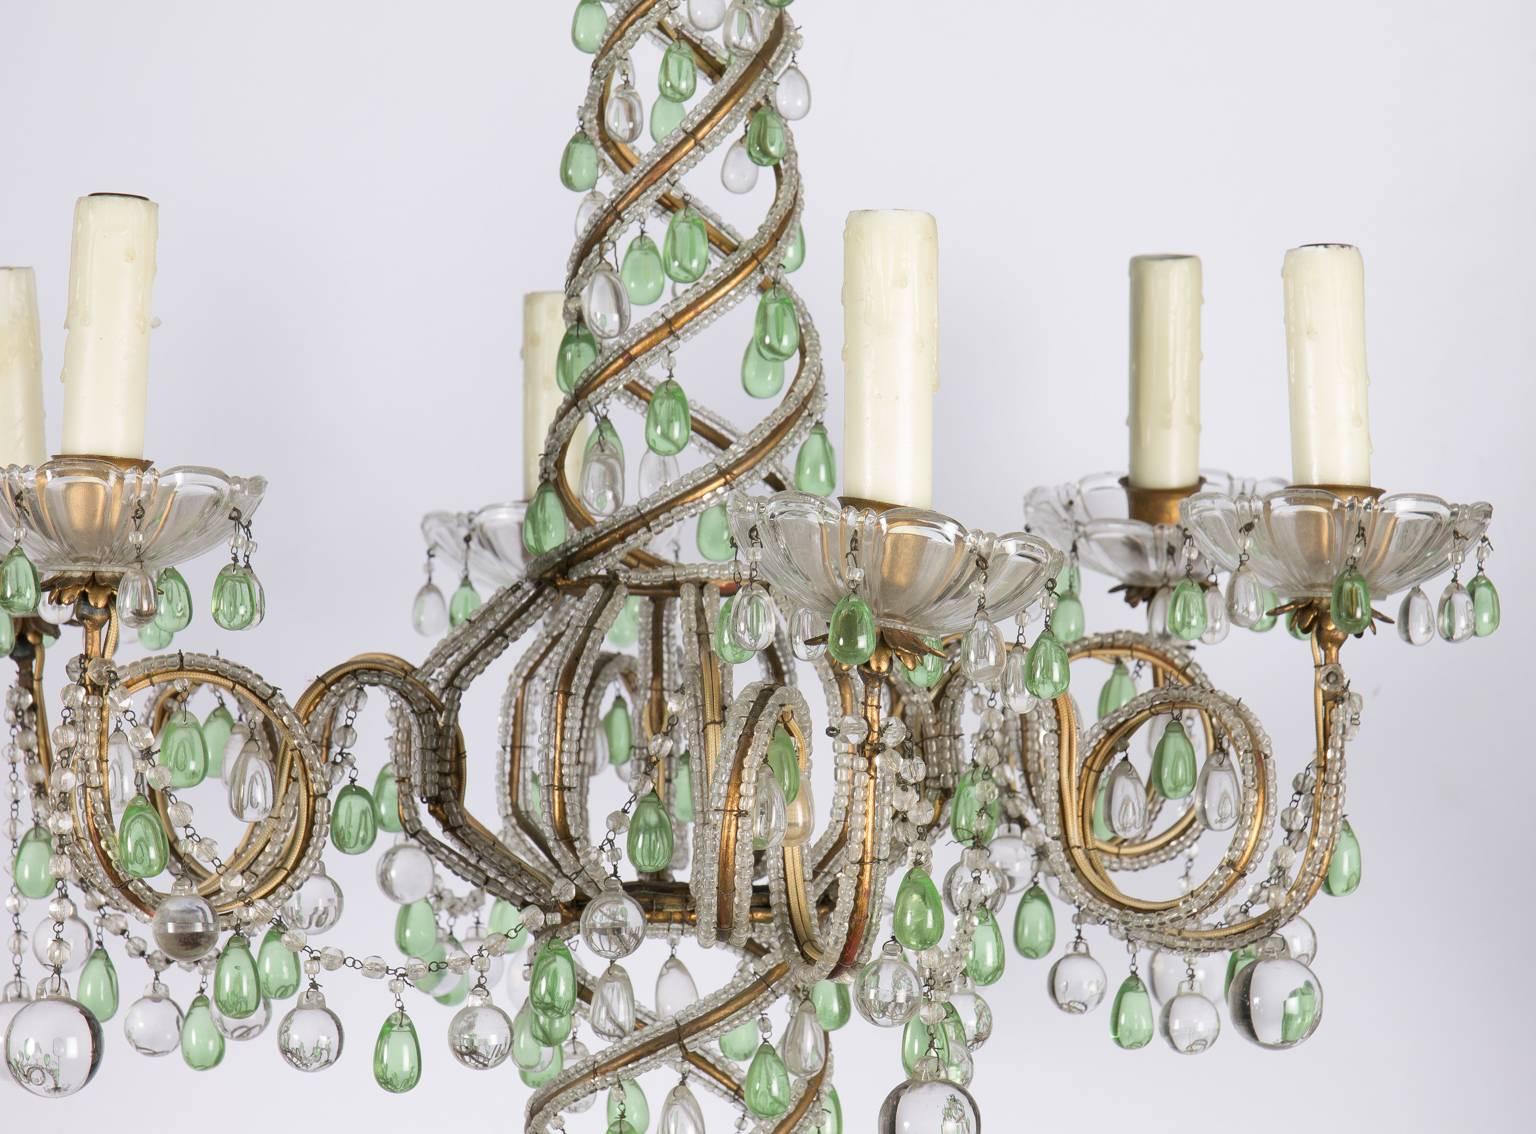 Early 20th century green and white six-light crystal chandelier.
   